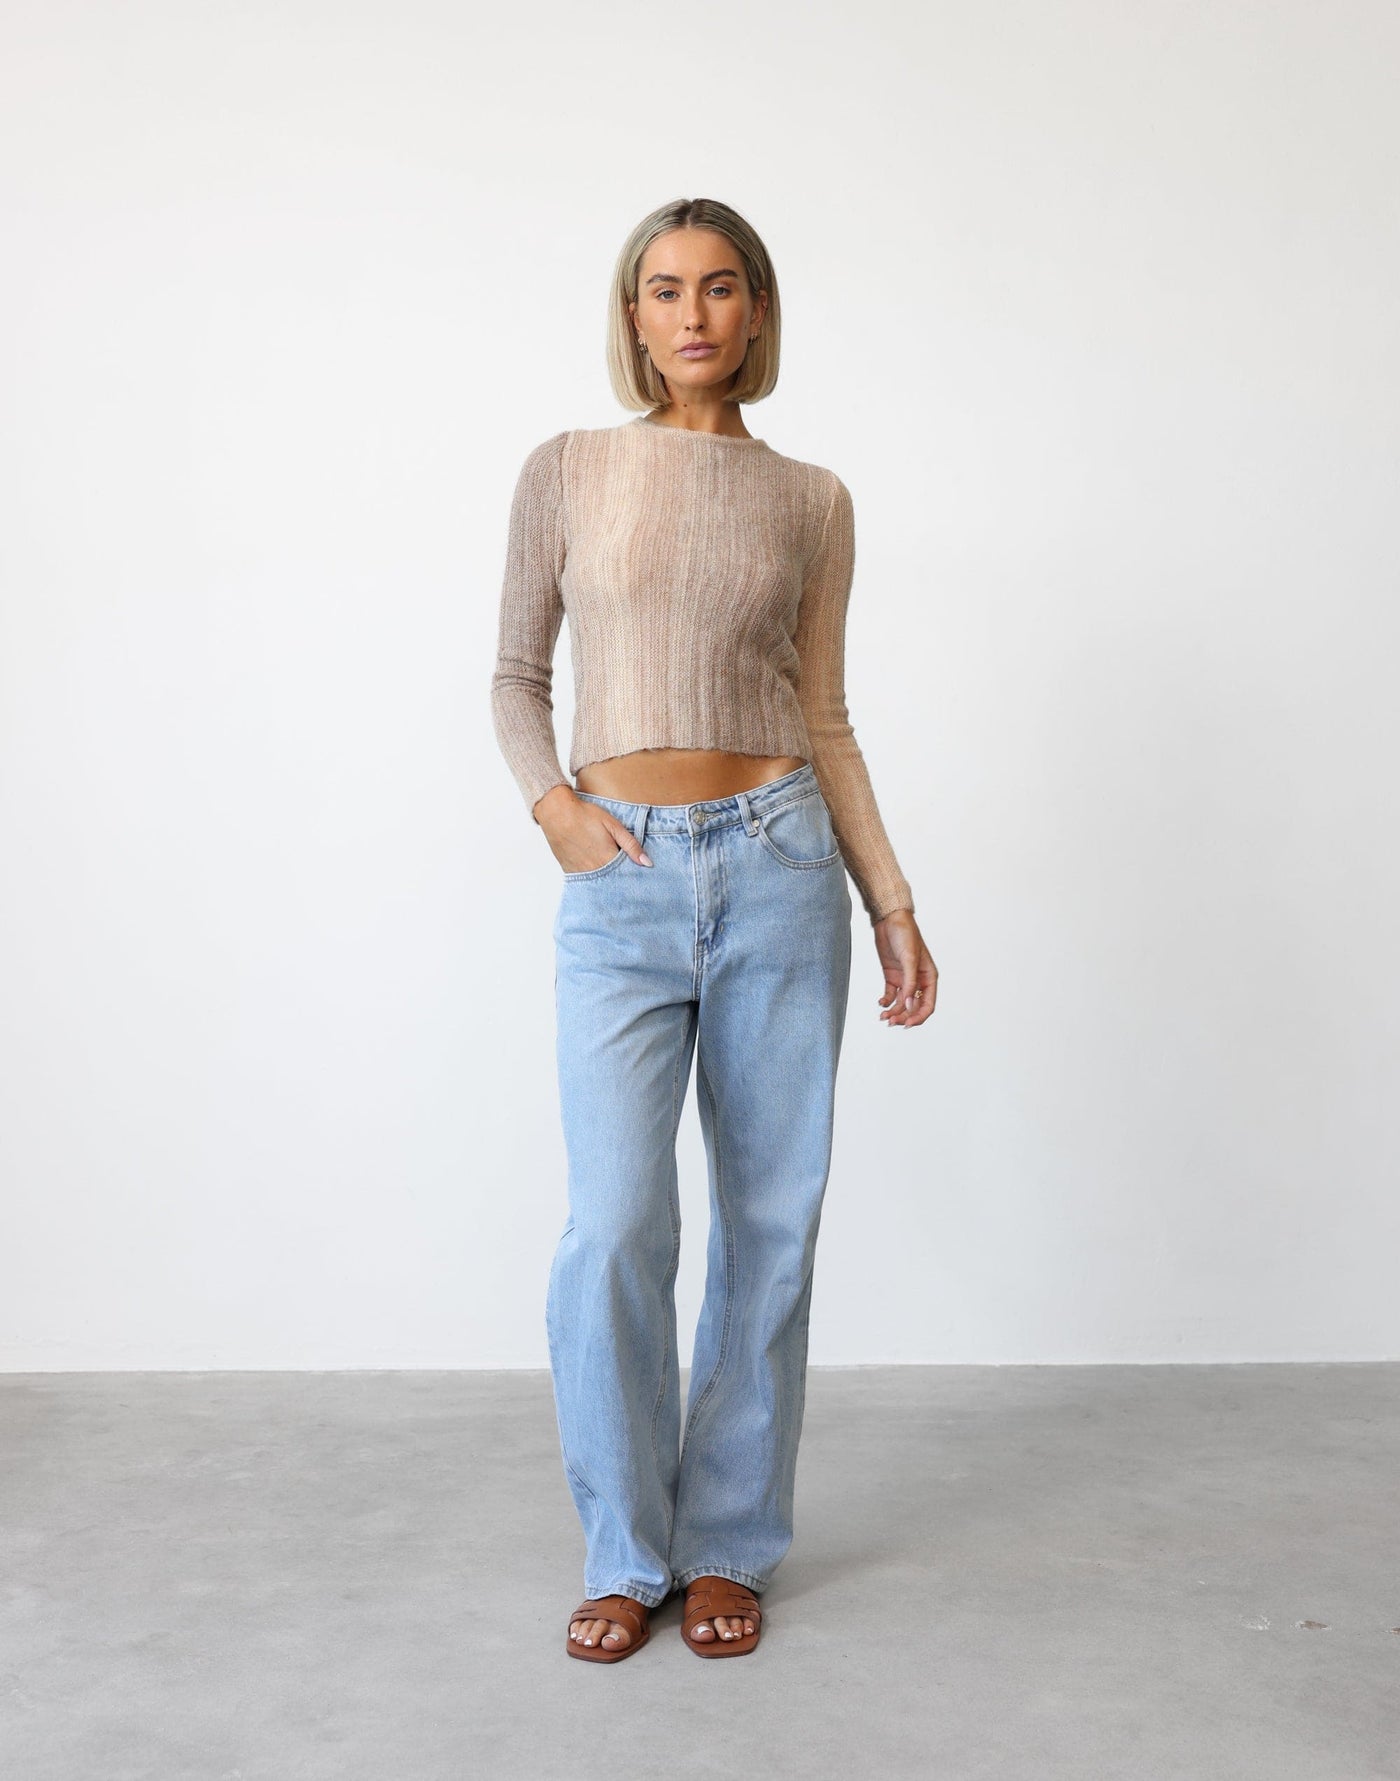 Lori Top (Beige) - Fuzzy Knit Detail Ribbed Top - Women's Top - Charcoal Clothing